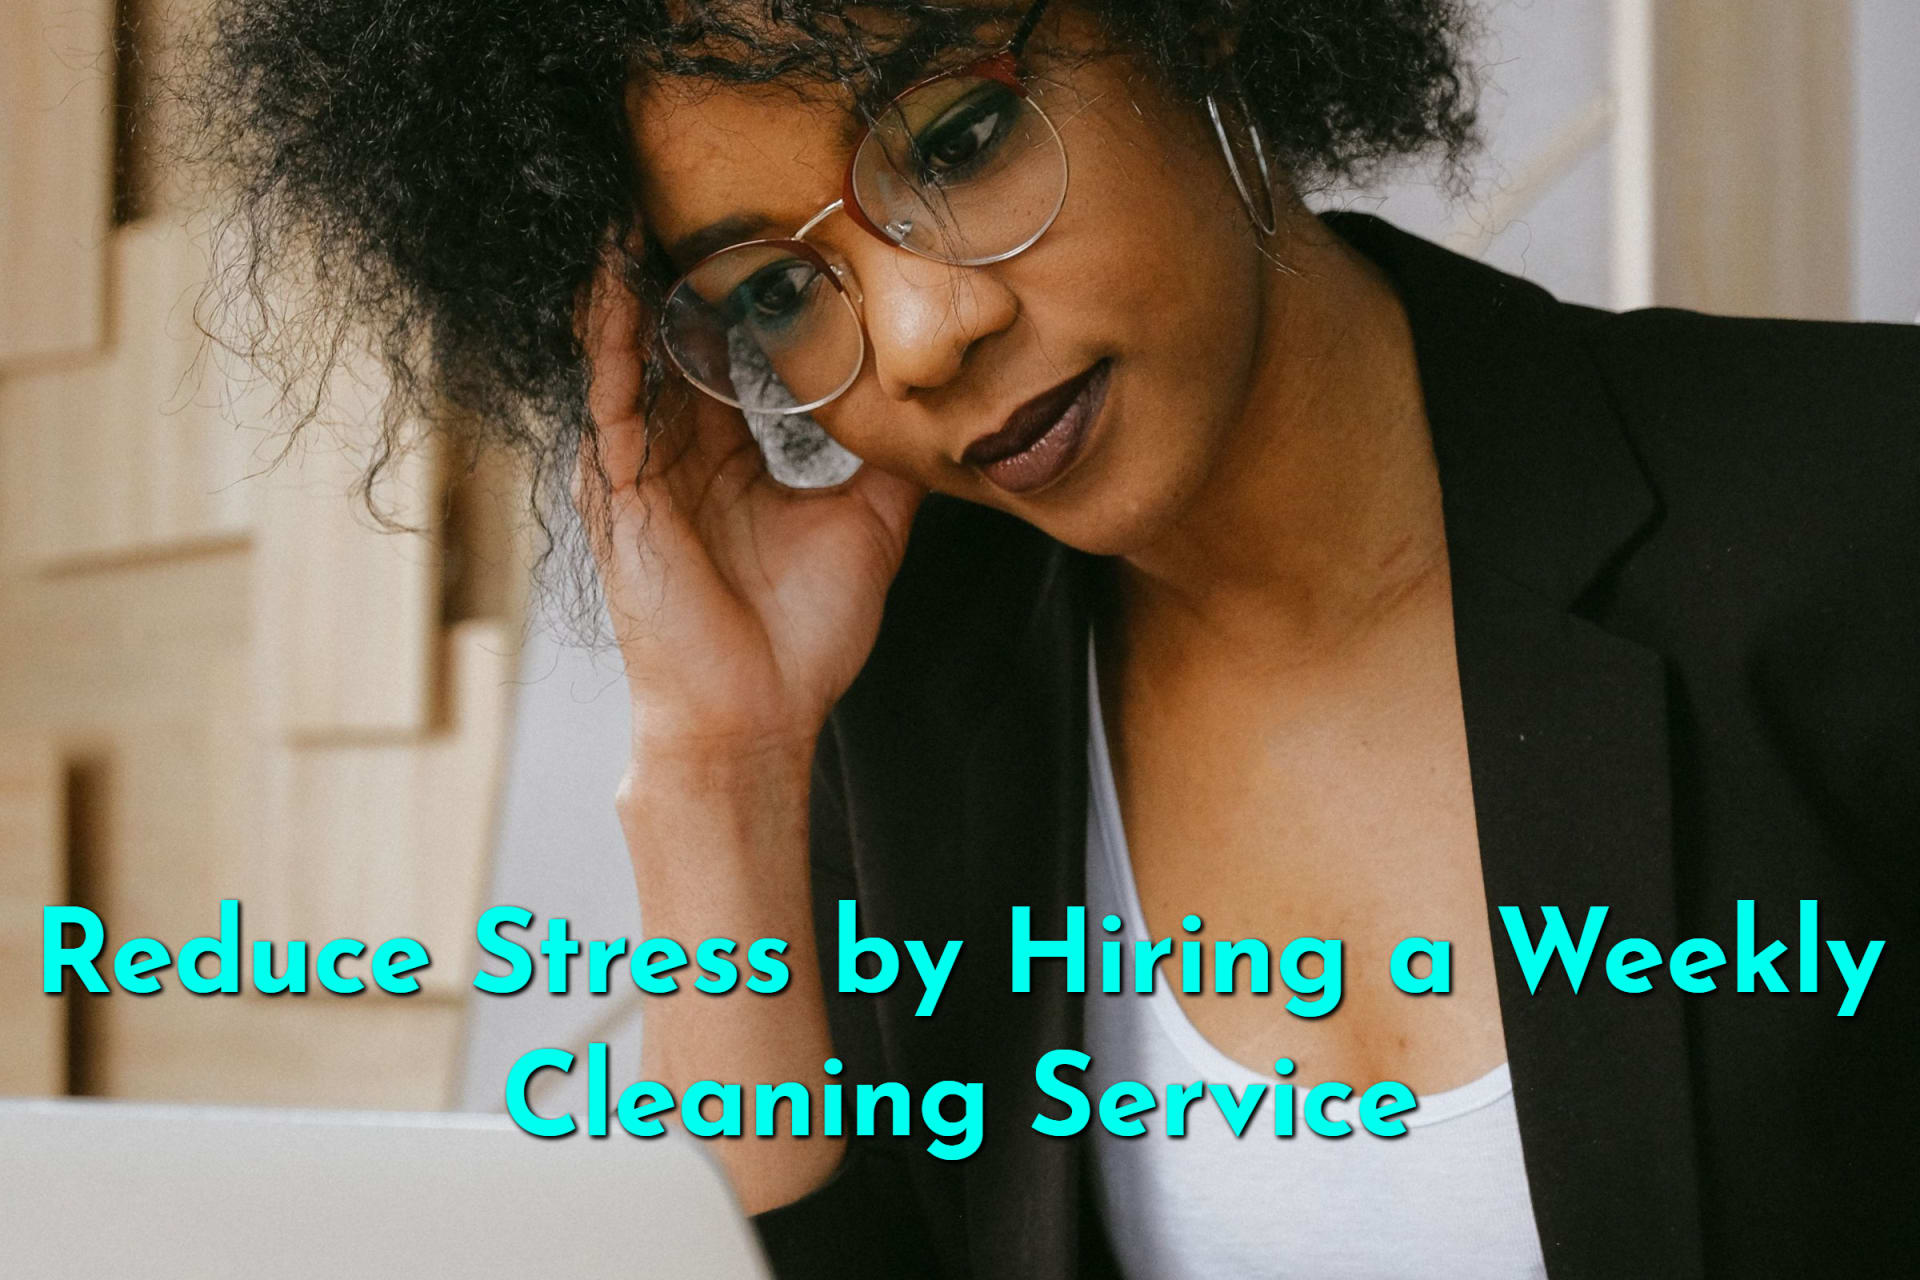 Stressed woman contemplating hiring a weekly cleaning service